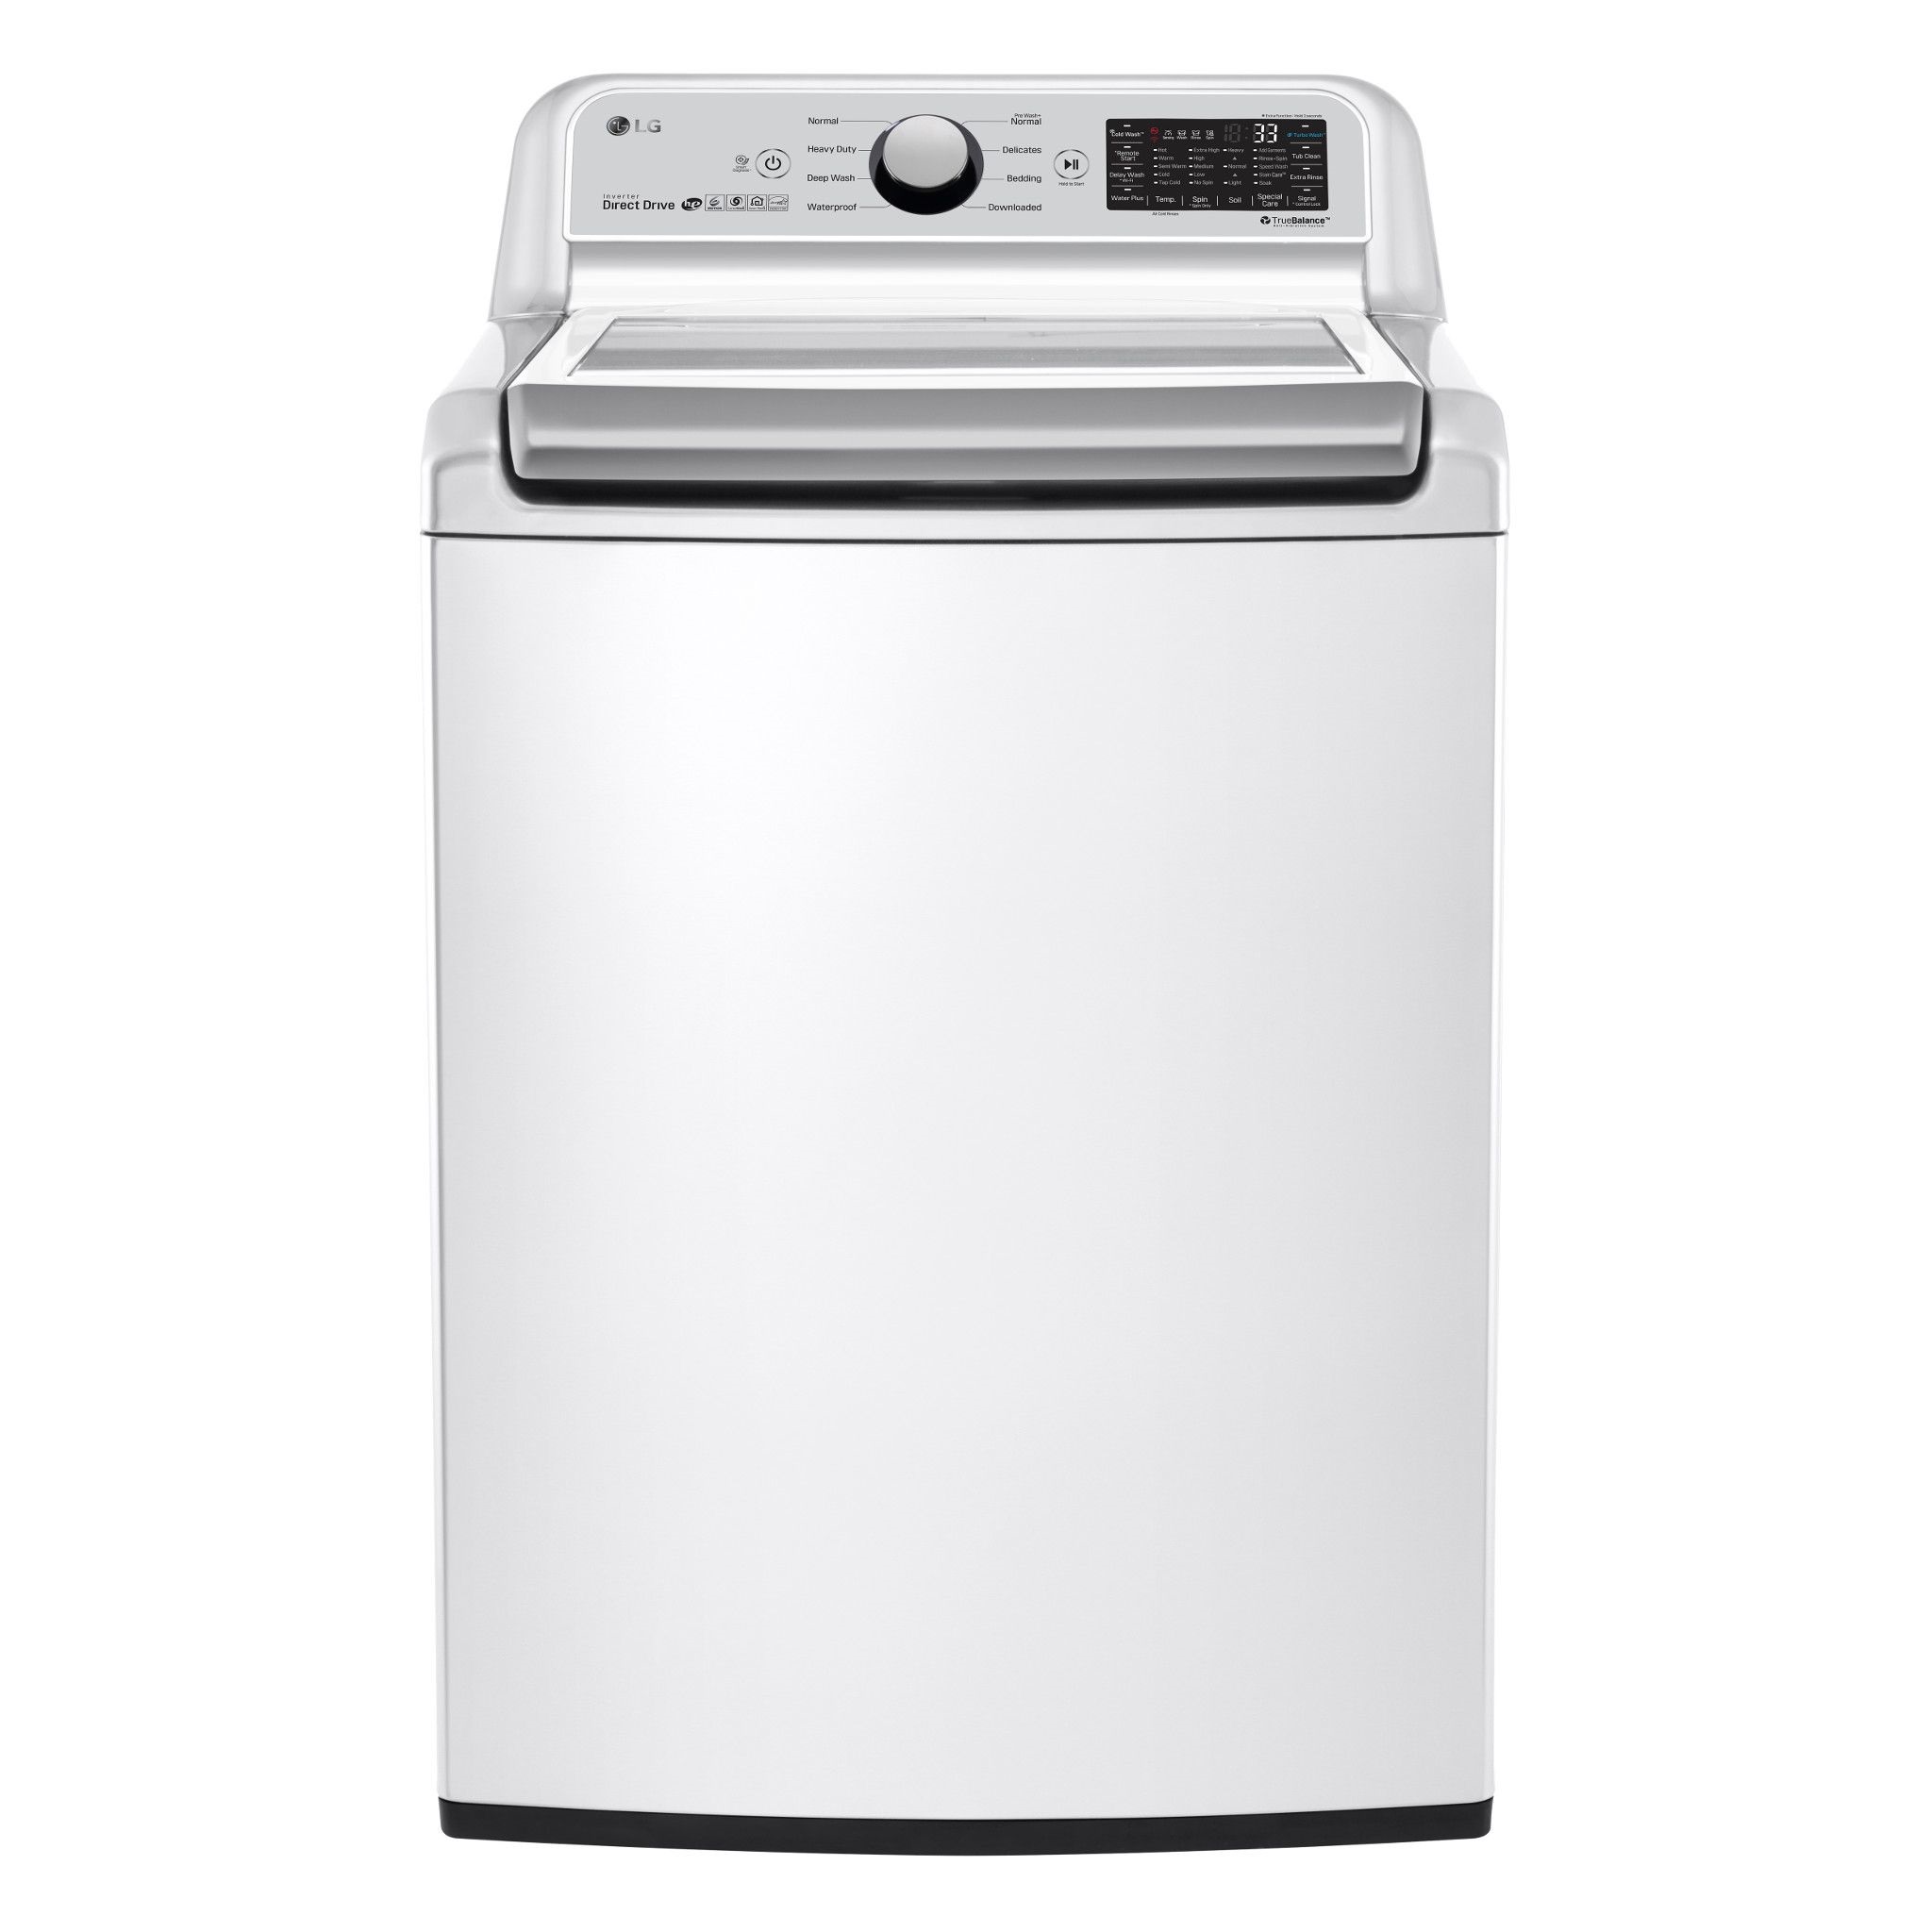 Front view of LG WT7300CW front load washer 